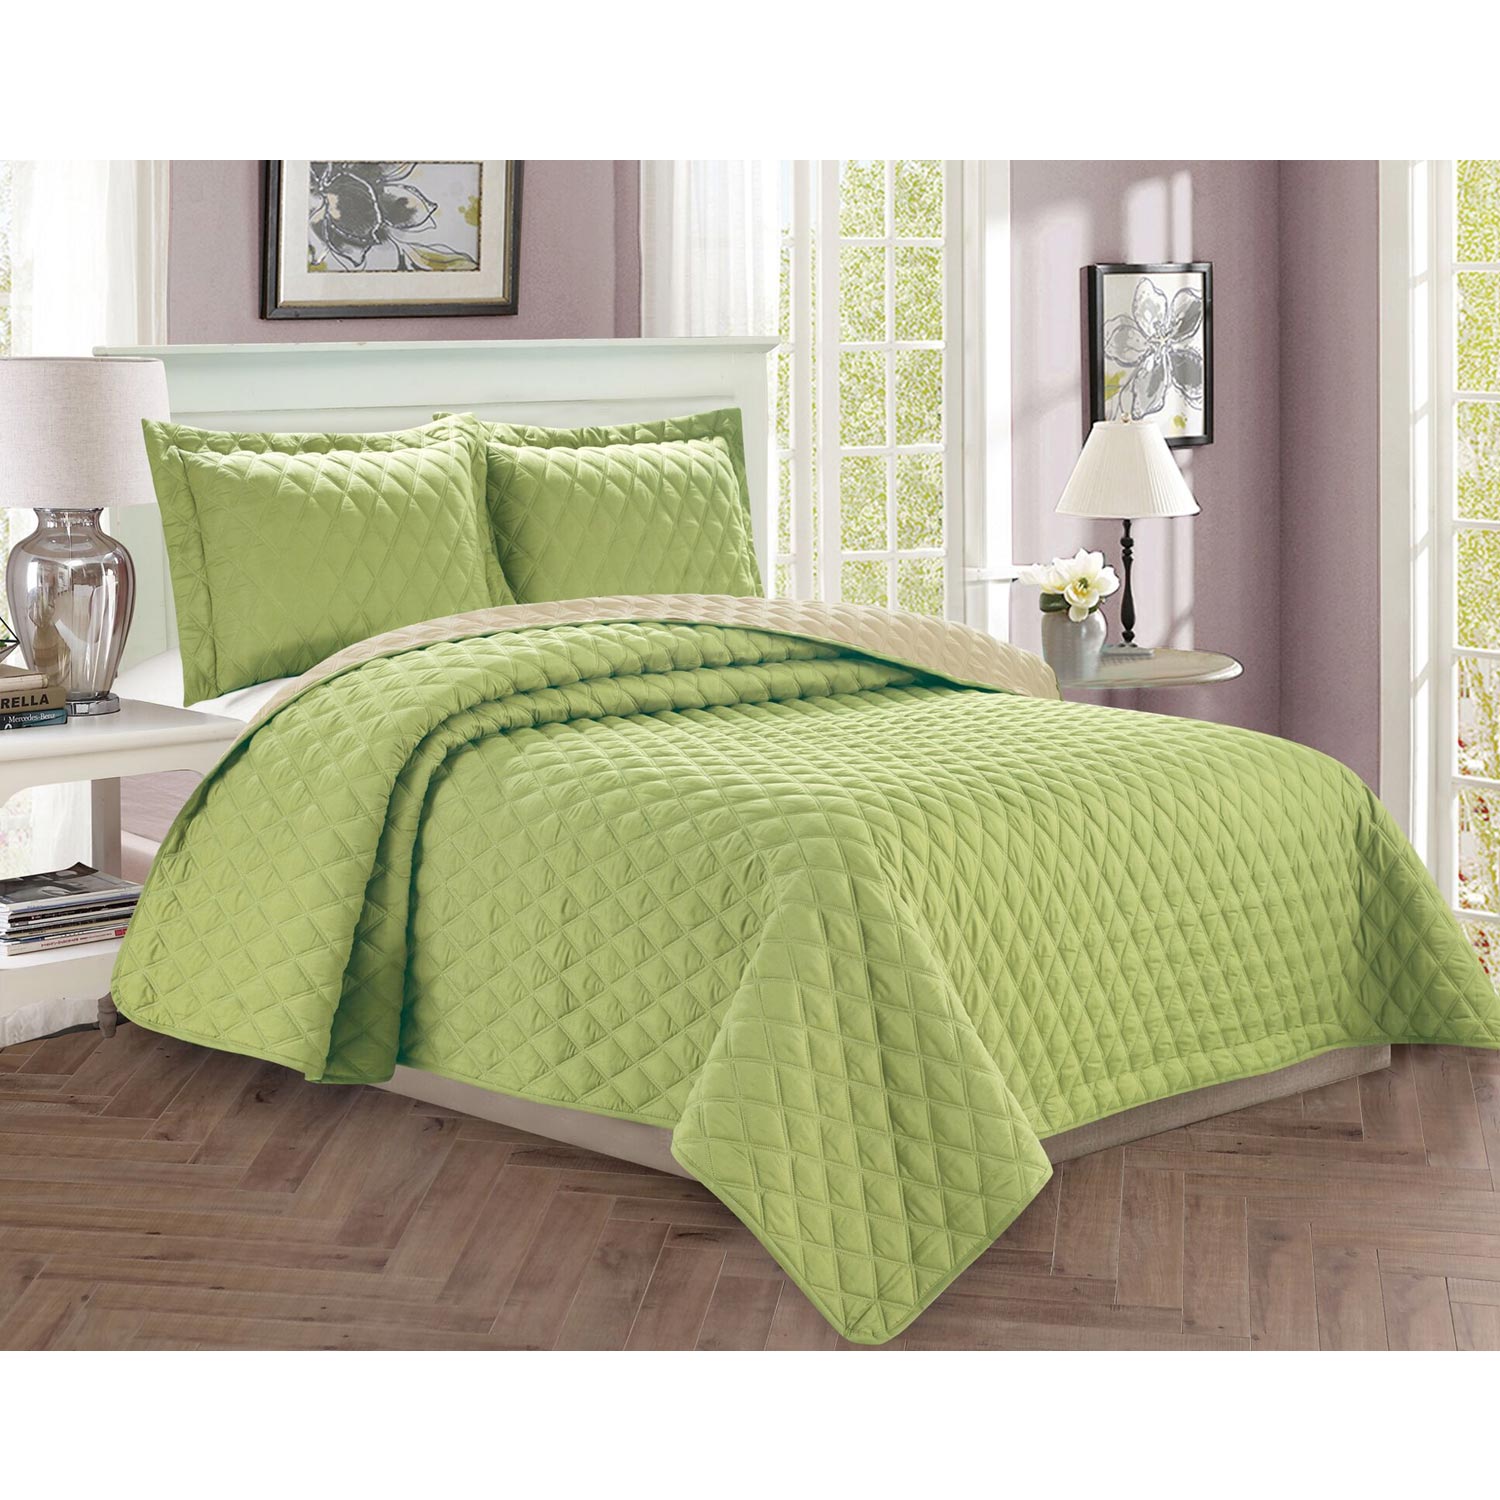 3-Piece Bedspread Coverlet Diamond Design Quilted Set